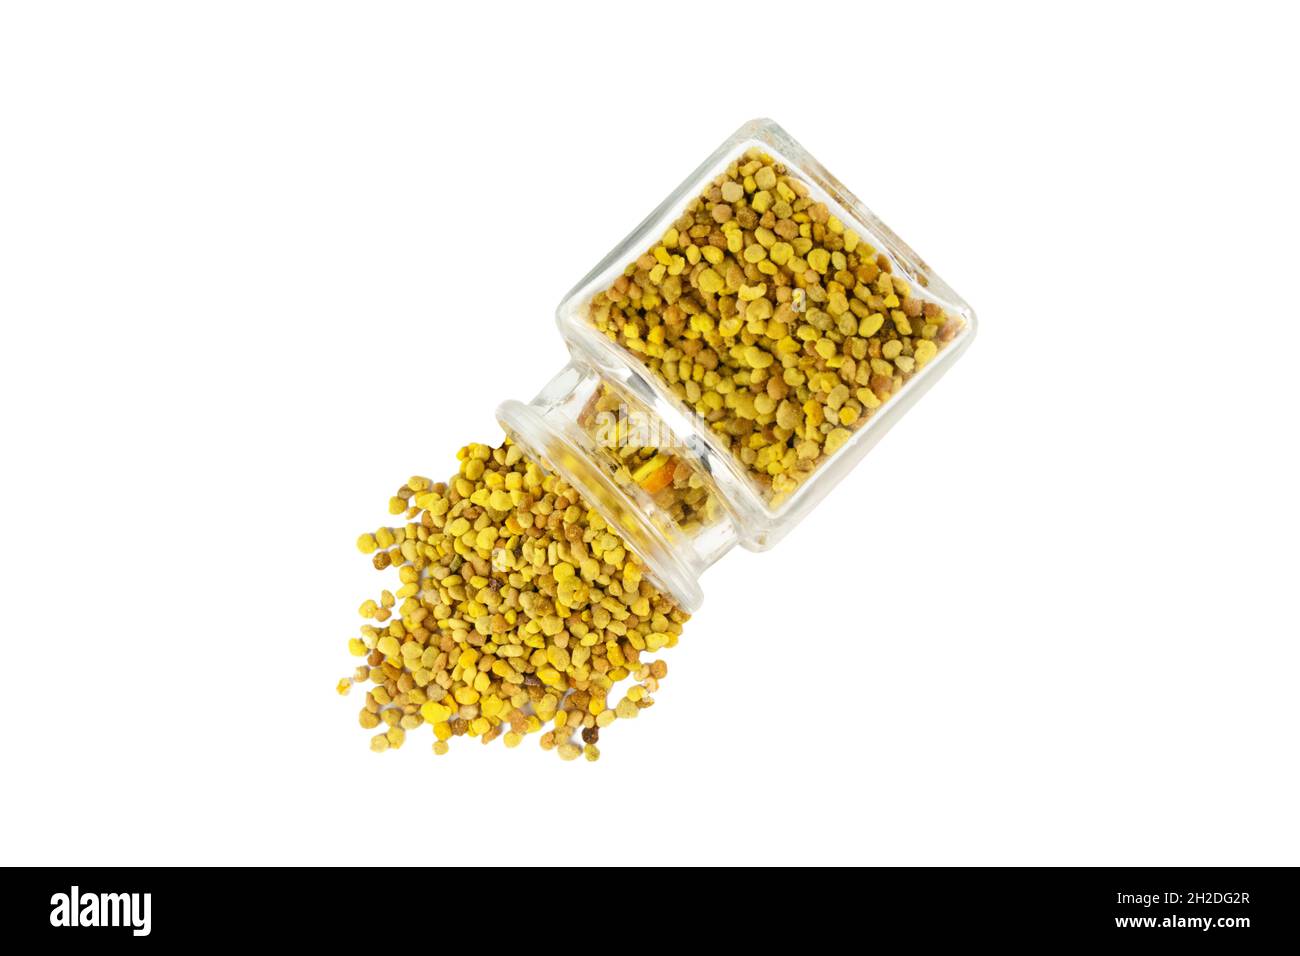 Bee pollen pouring out of the glass jar isolated on white background. natural herbal medicine to relieve inflammation, influenza, boosts liver health, Stock Photo